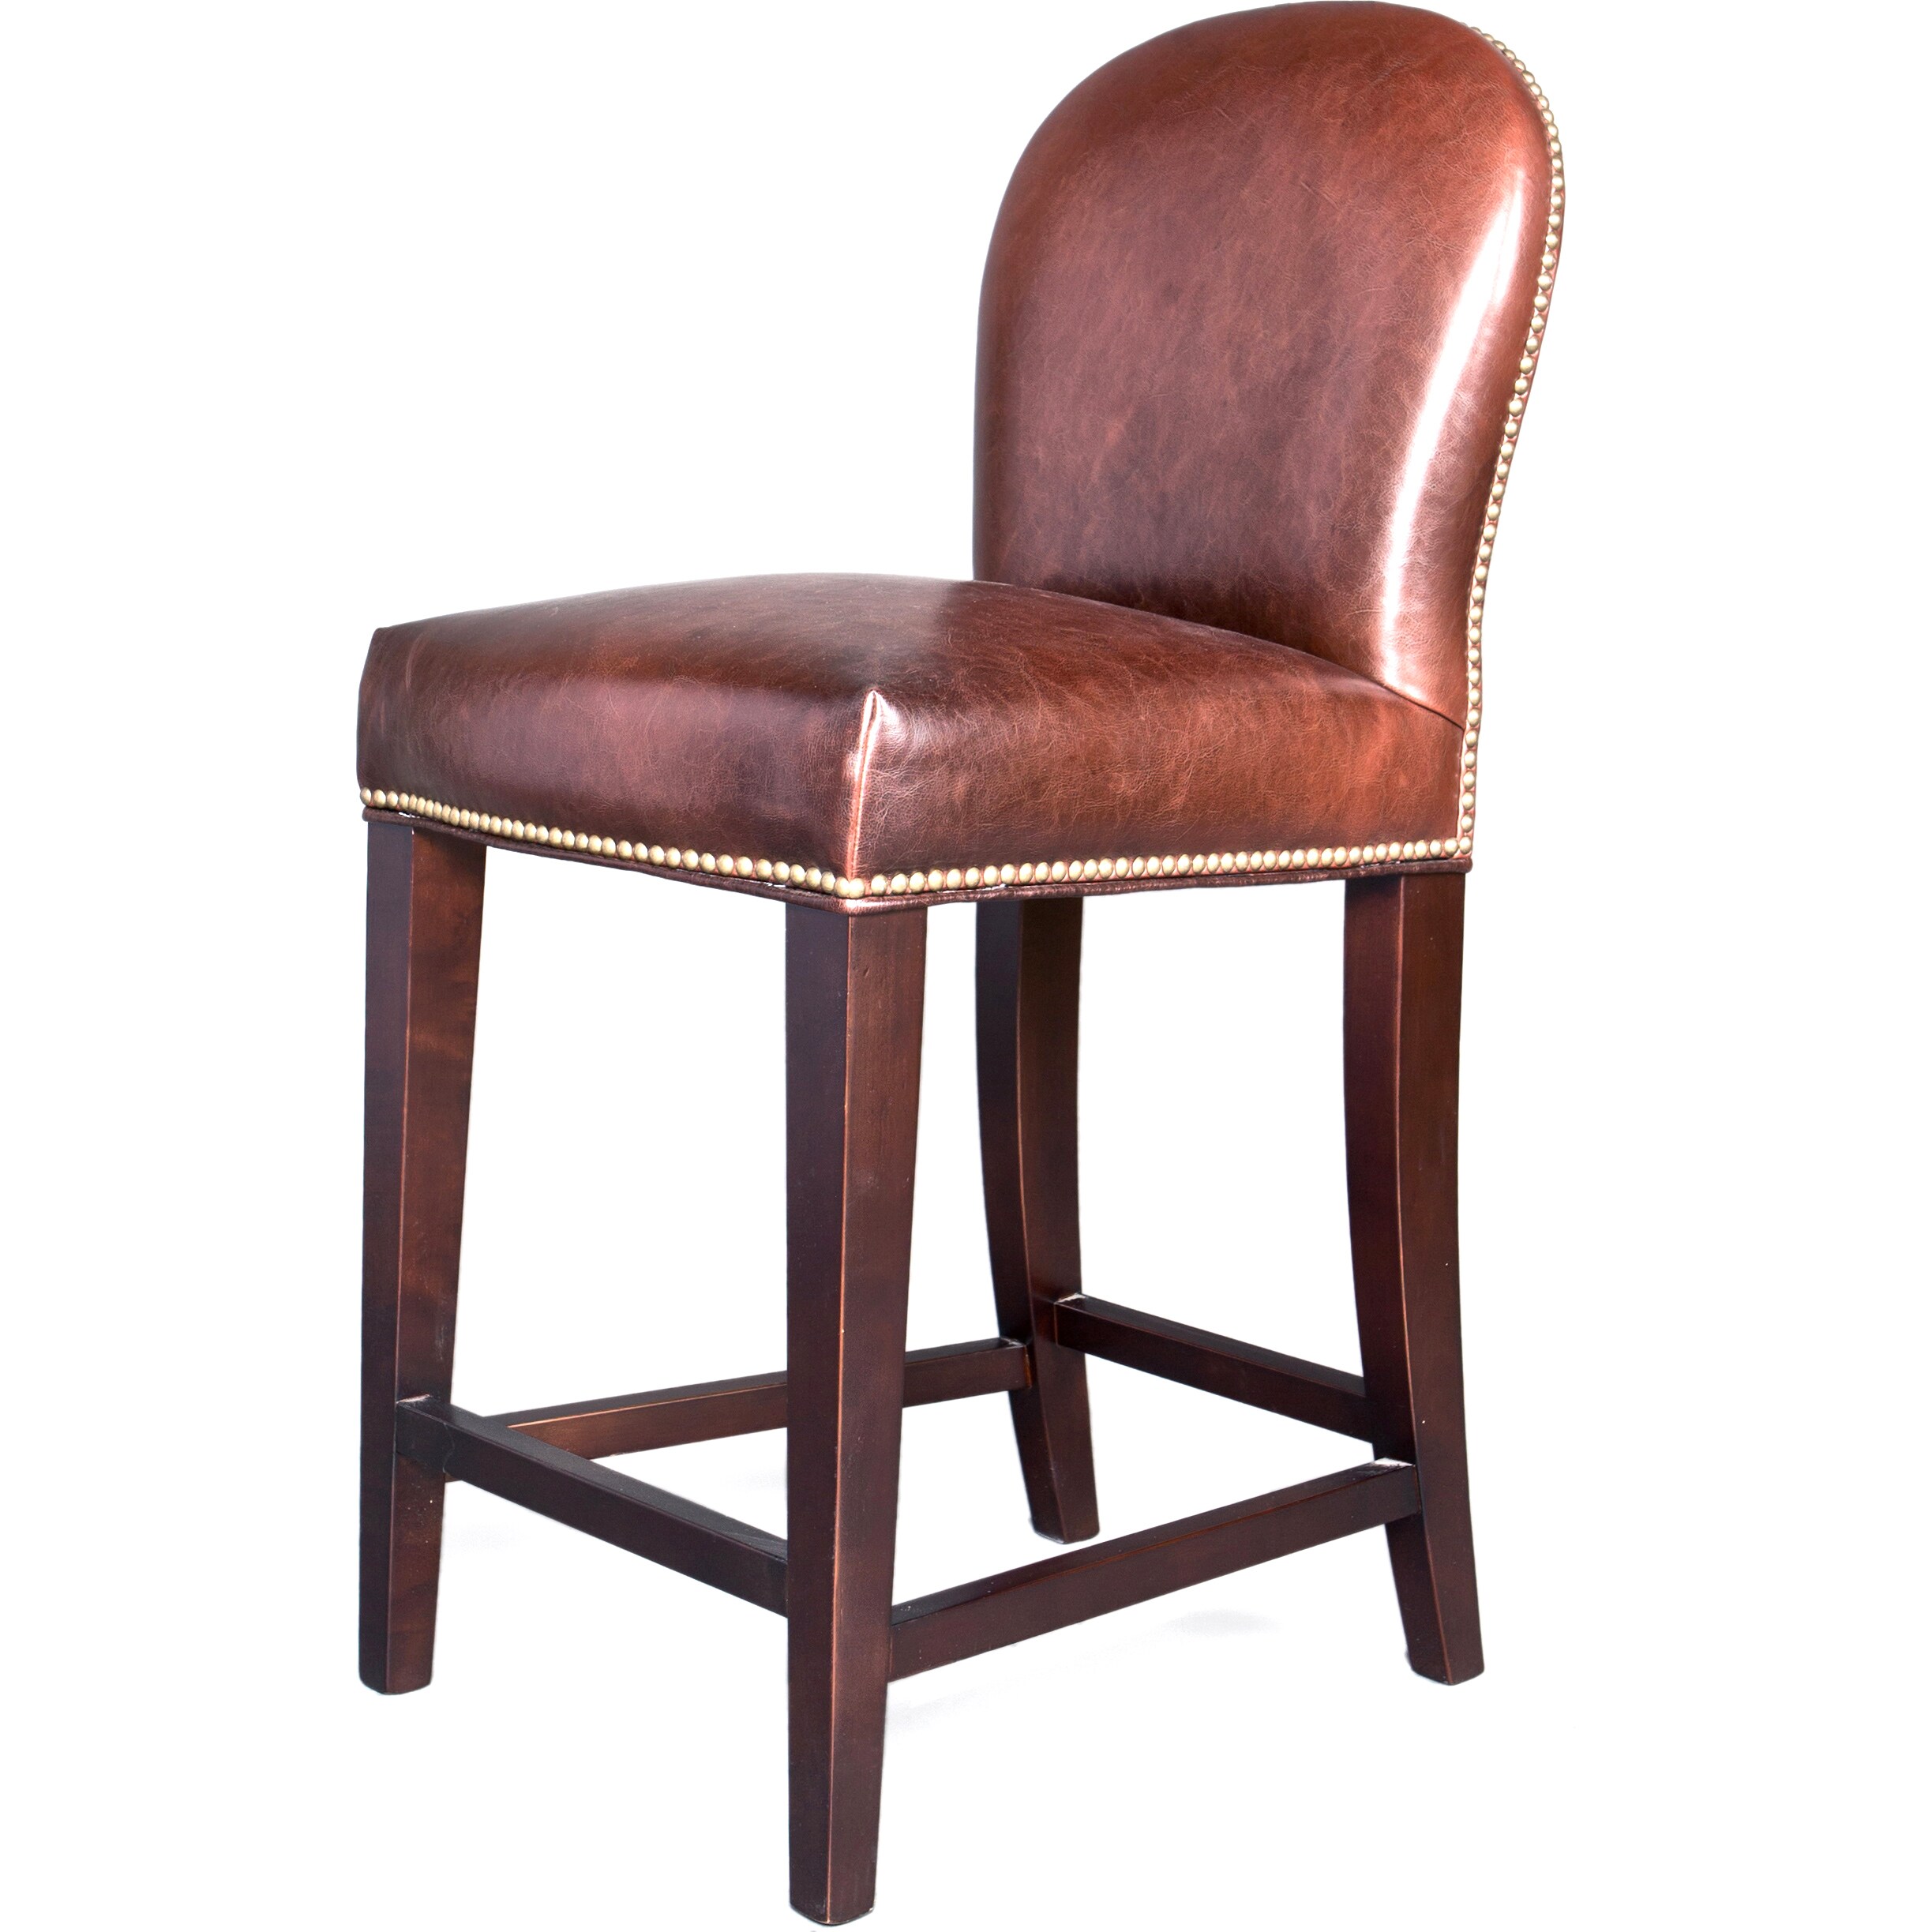 Leather Bar Stools Buy Counter, Swivel and Kitchen